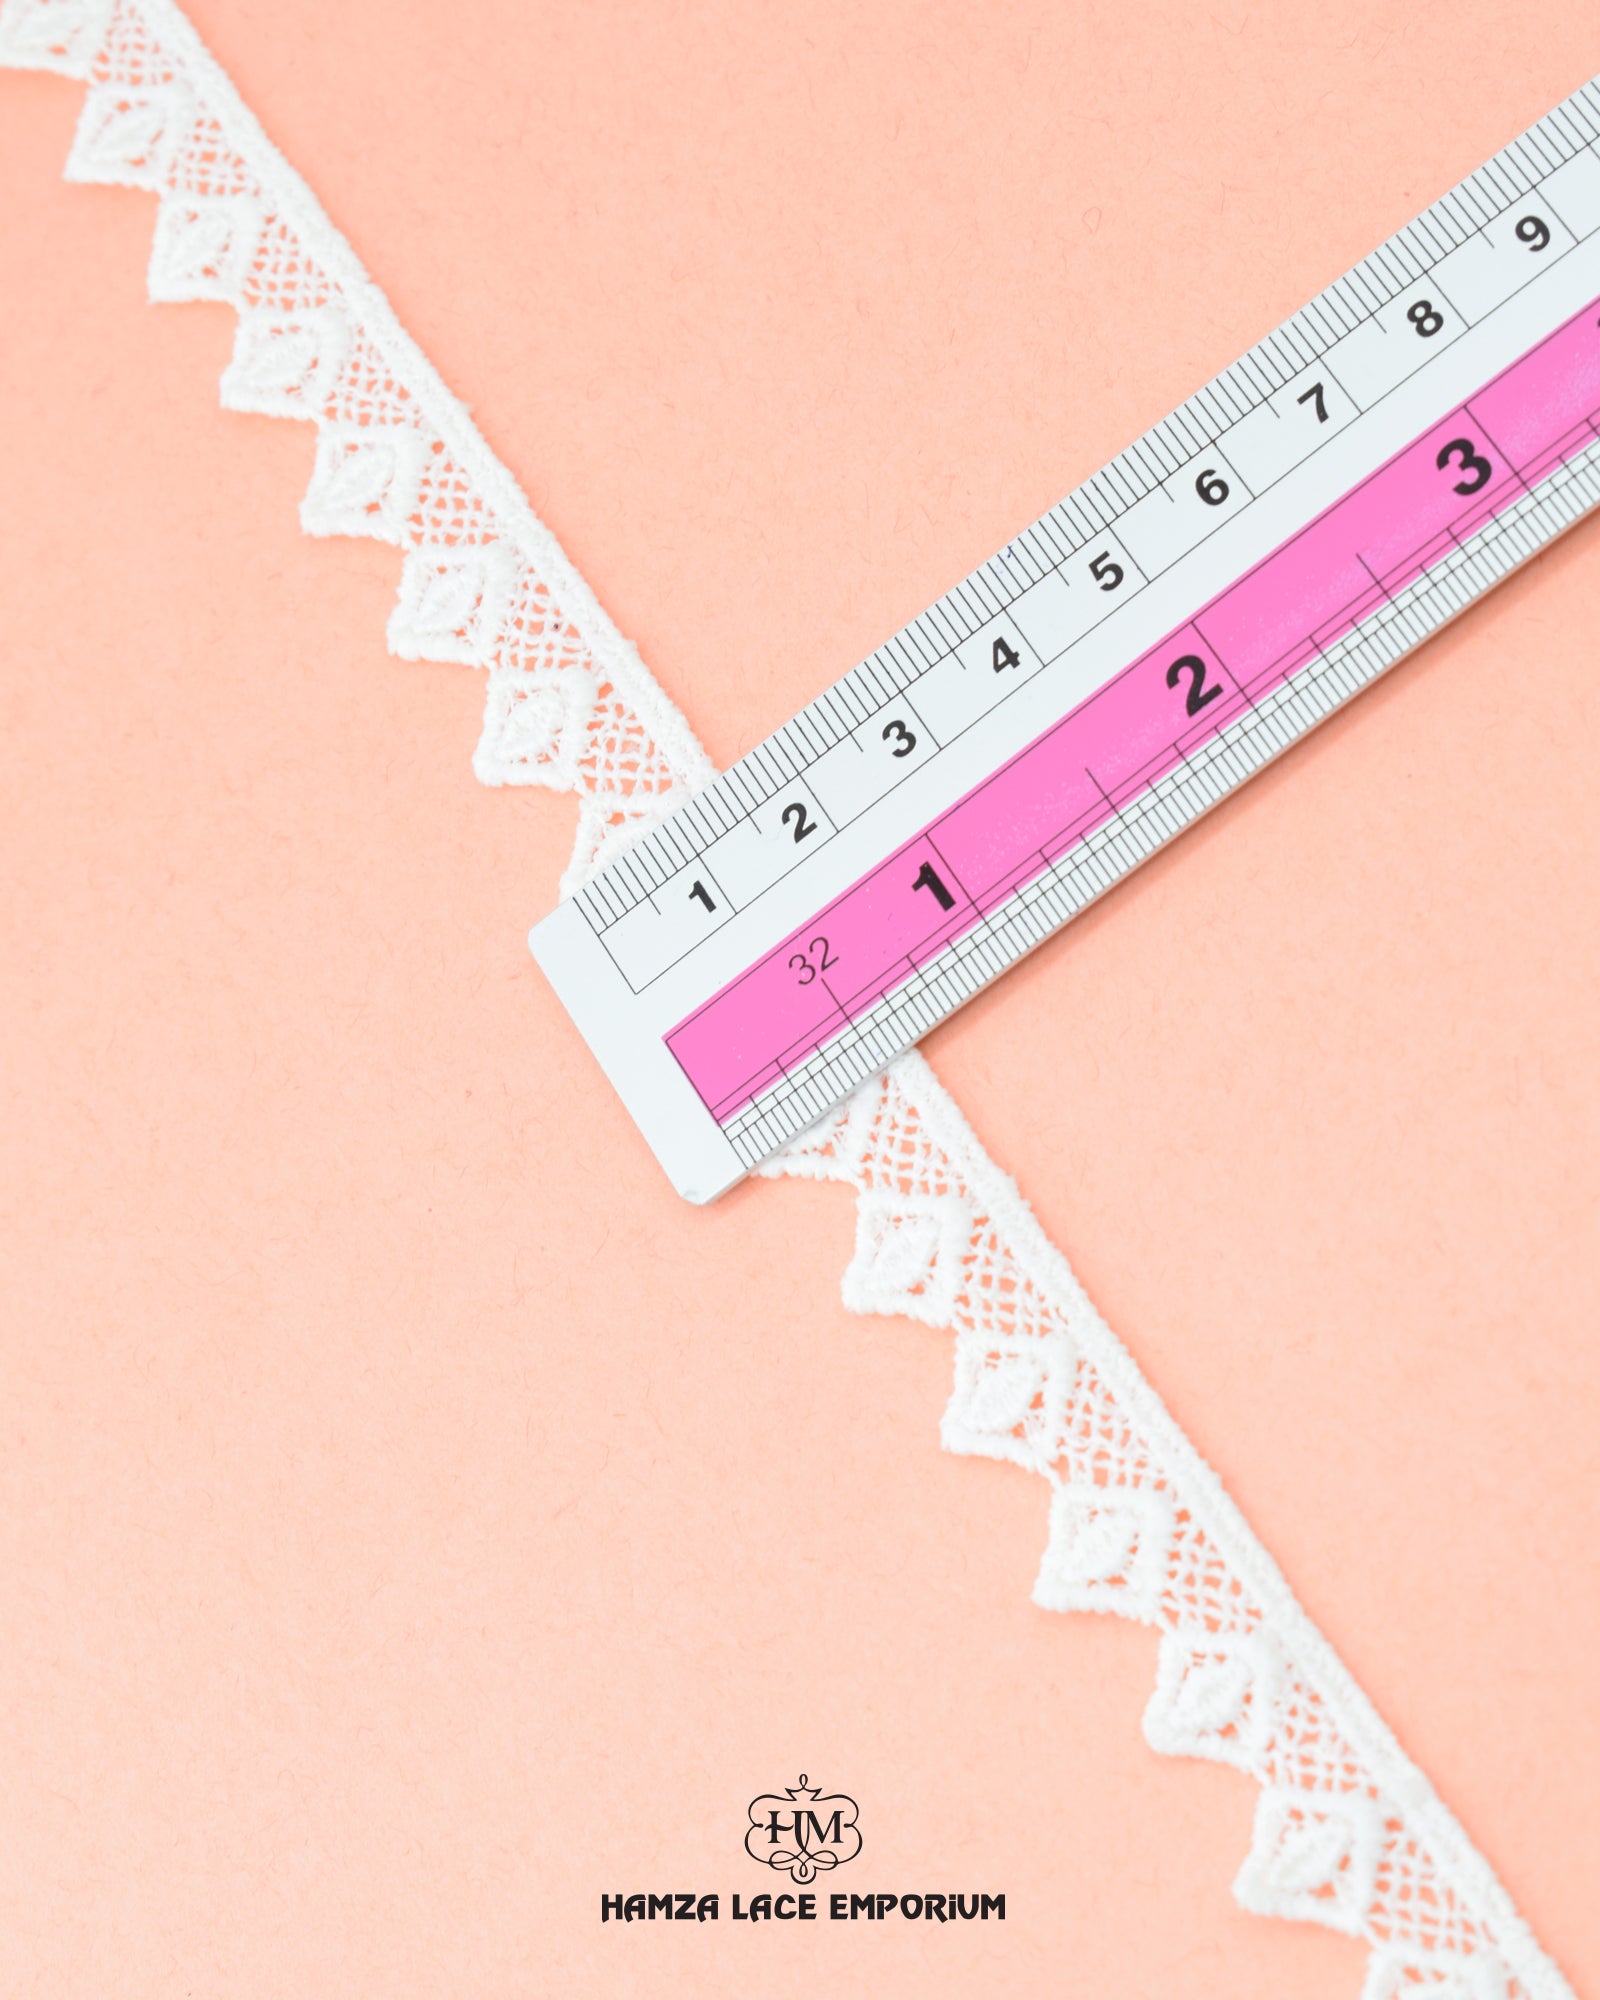 Size of the 'Edging Lace 22396' is given as 0.5 inches with the help of a ruler